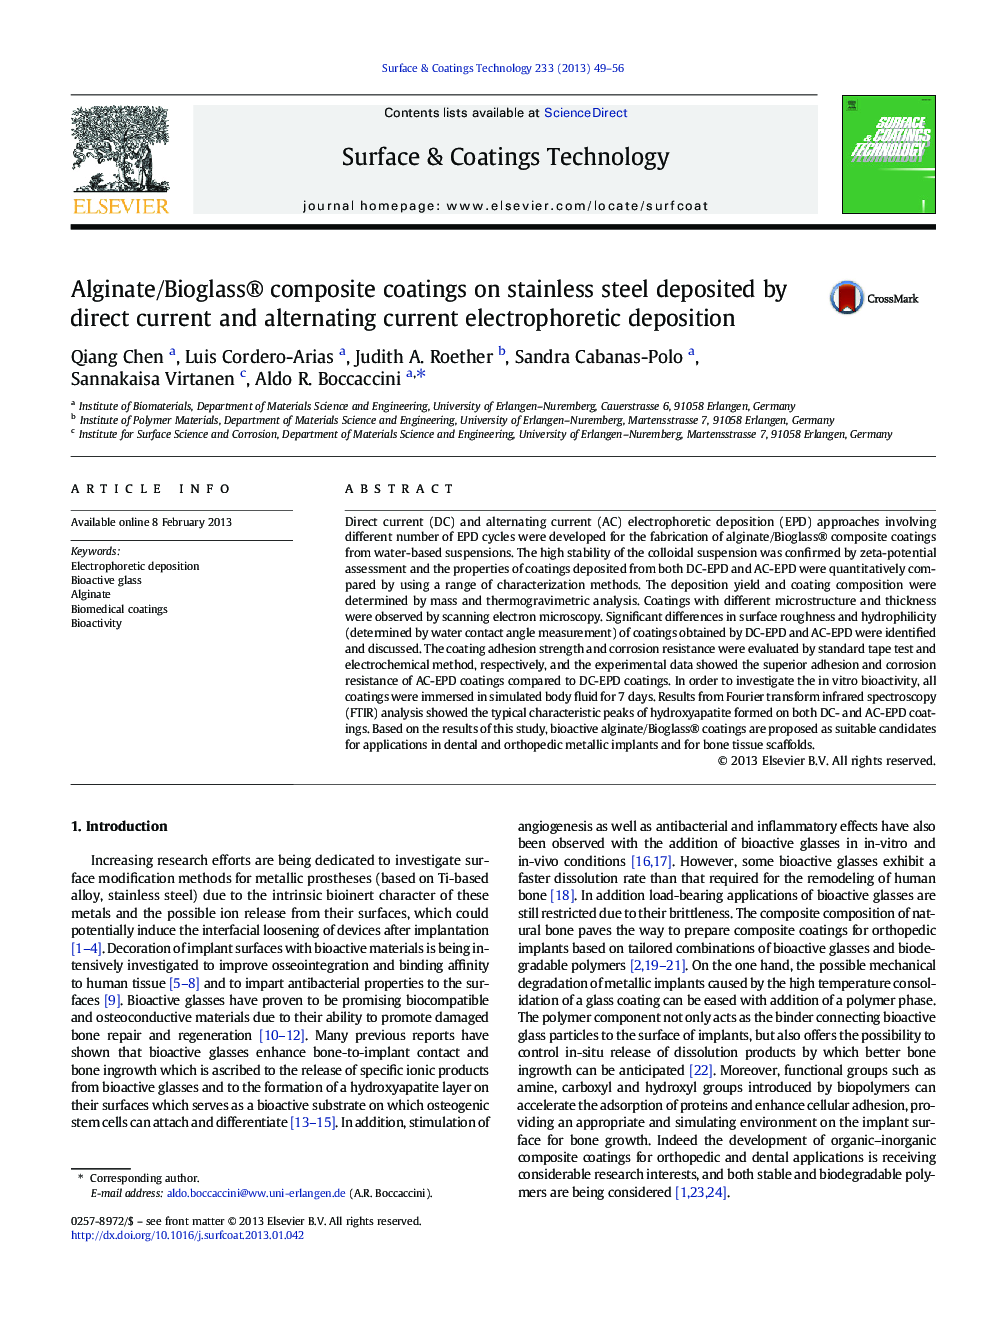 Alginate/Bioglass® composite coatings on stainless steel deposited by direct current and alternating current electrophoretic deposition